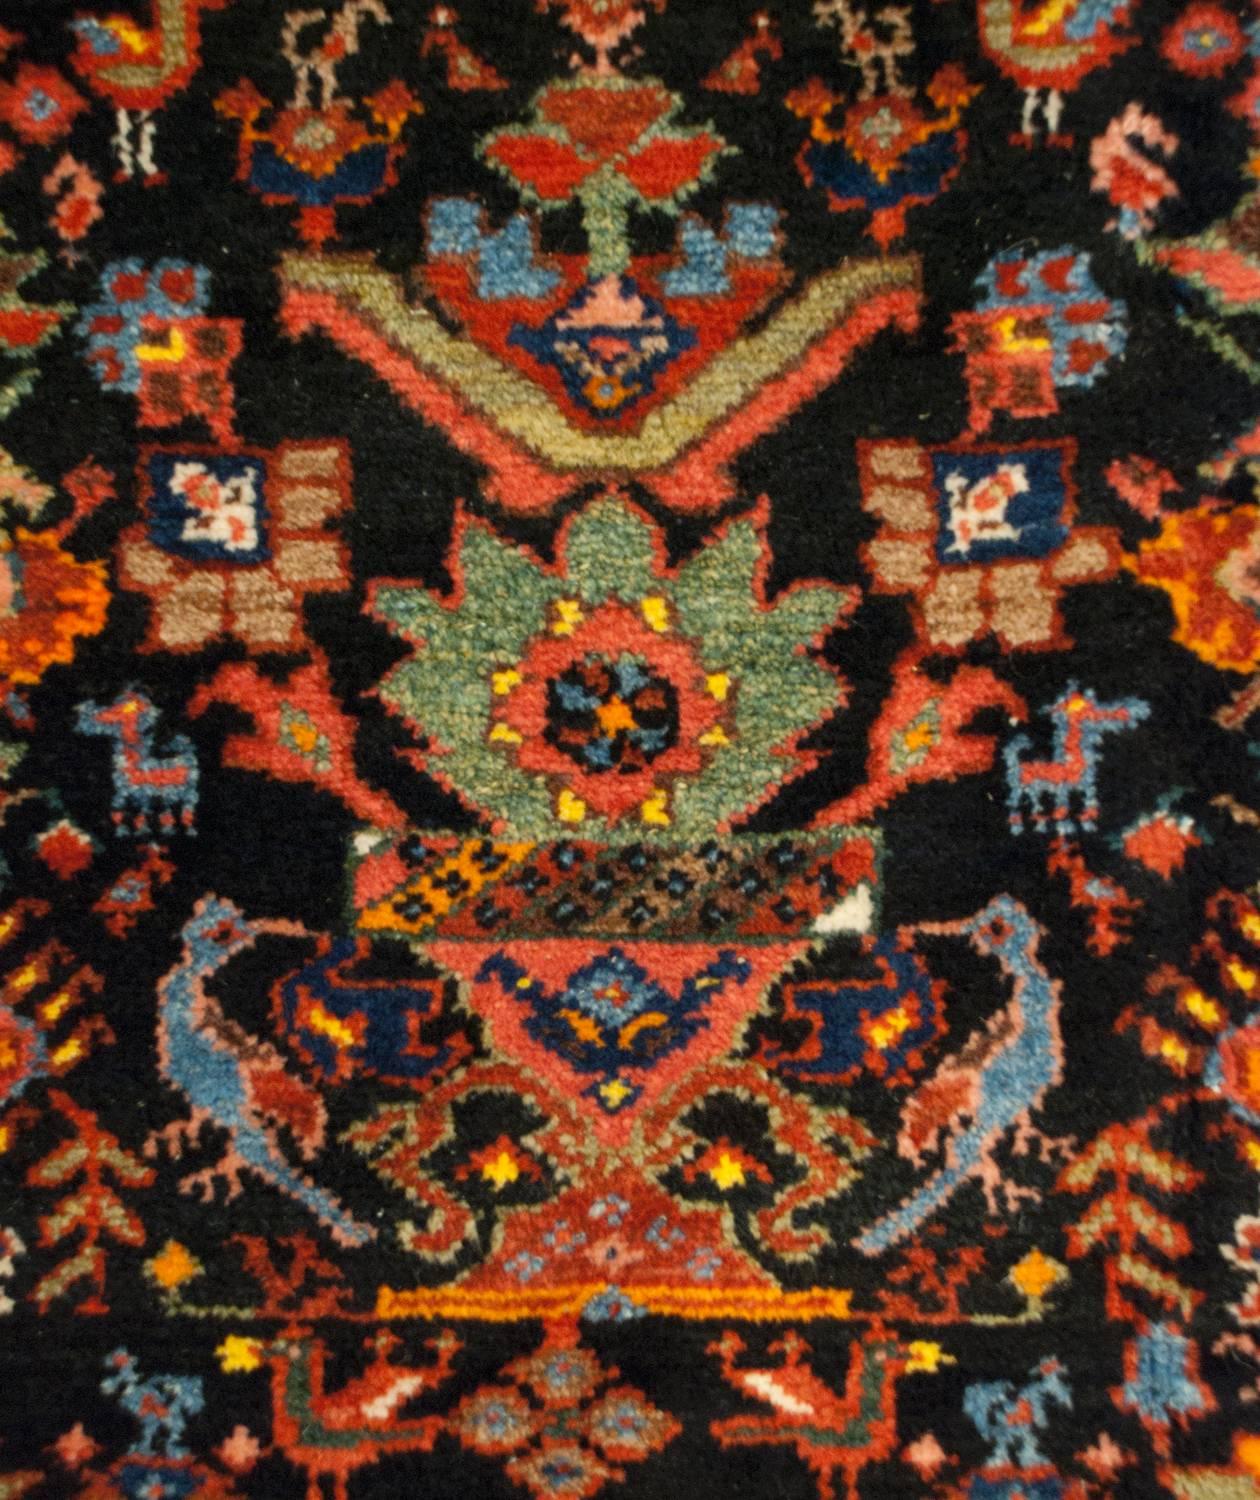 An unbelievable early 20th century Persian Bakhtiari rug with an all-over field of multicolored vases potted with myriad flowers, flanked by peacocks, ducks, and chickens all on a dark indigo background. The border is wide, comprised of a beautiful